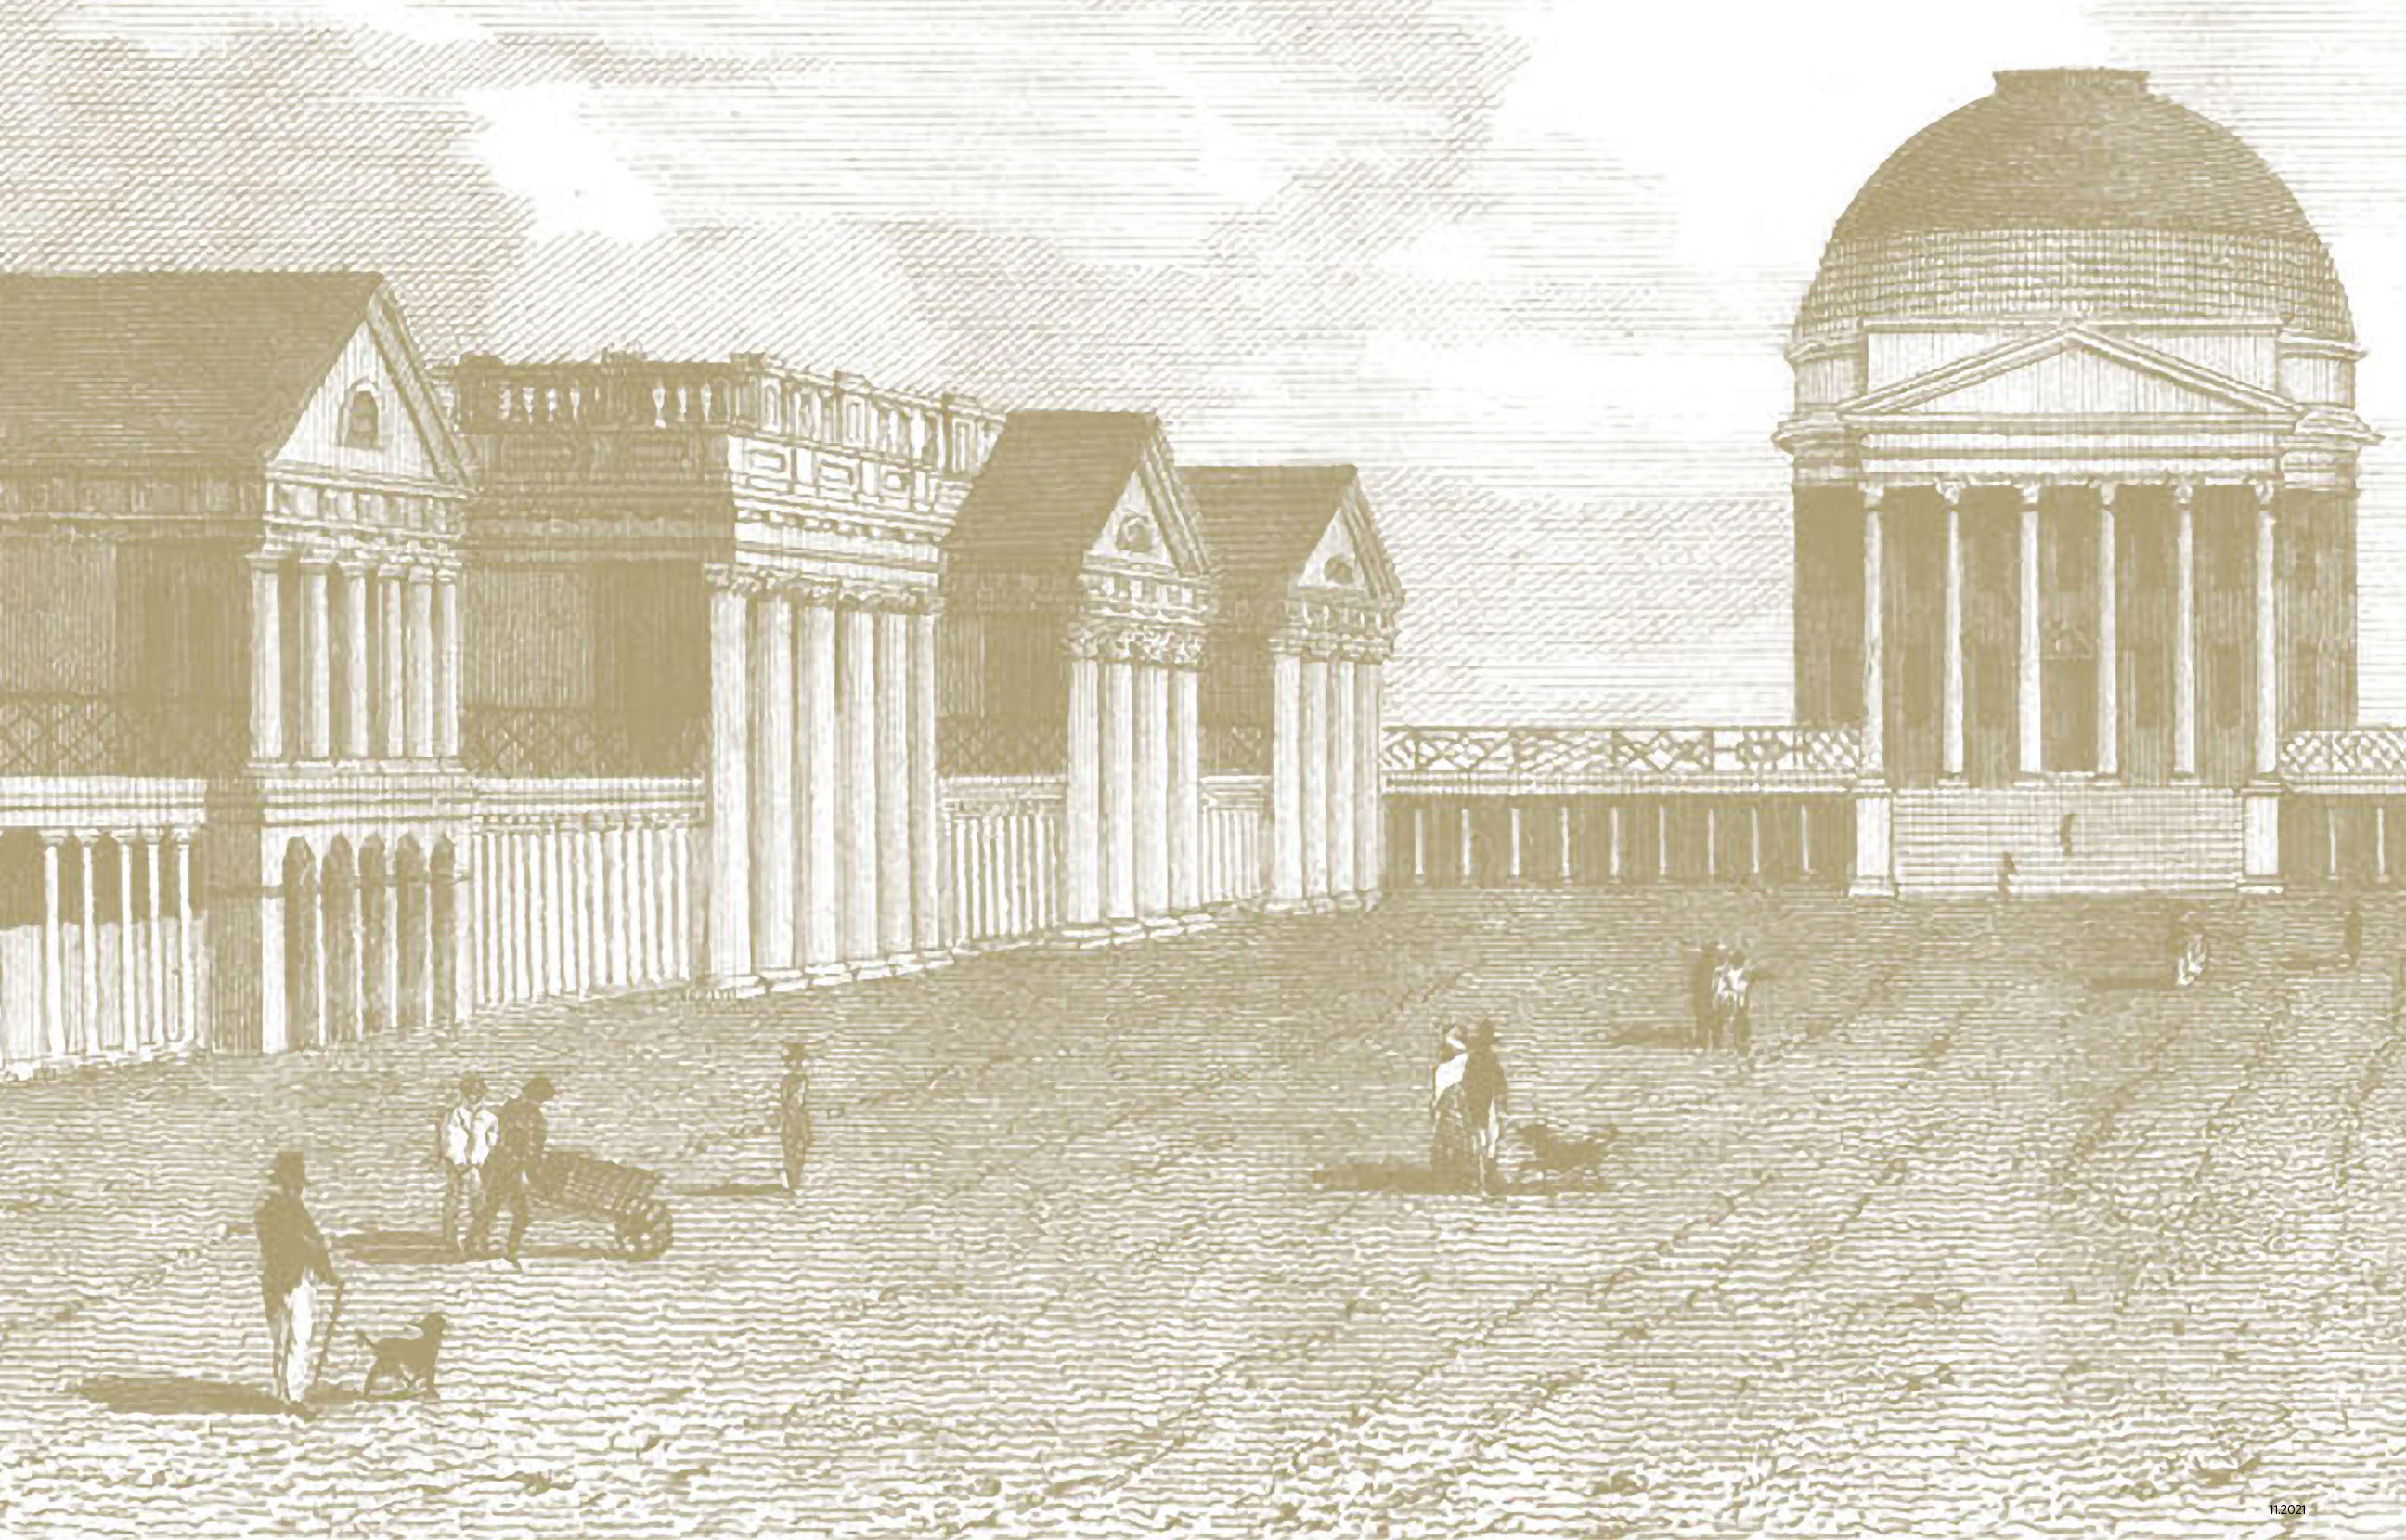 A detail of a 19th century engraving of the Academical Village looking north towards the Rotunda. Several figures stand on the Lawn.